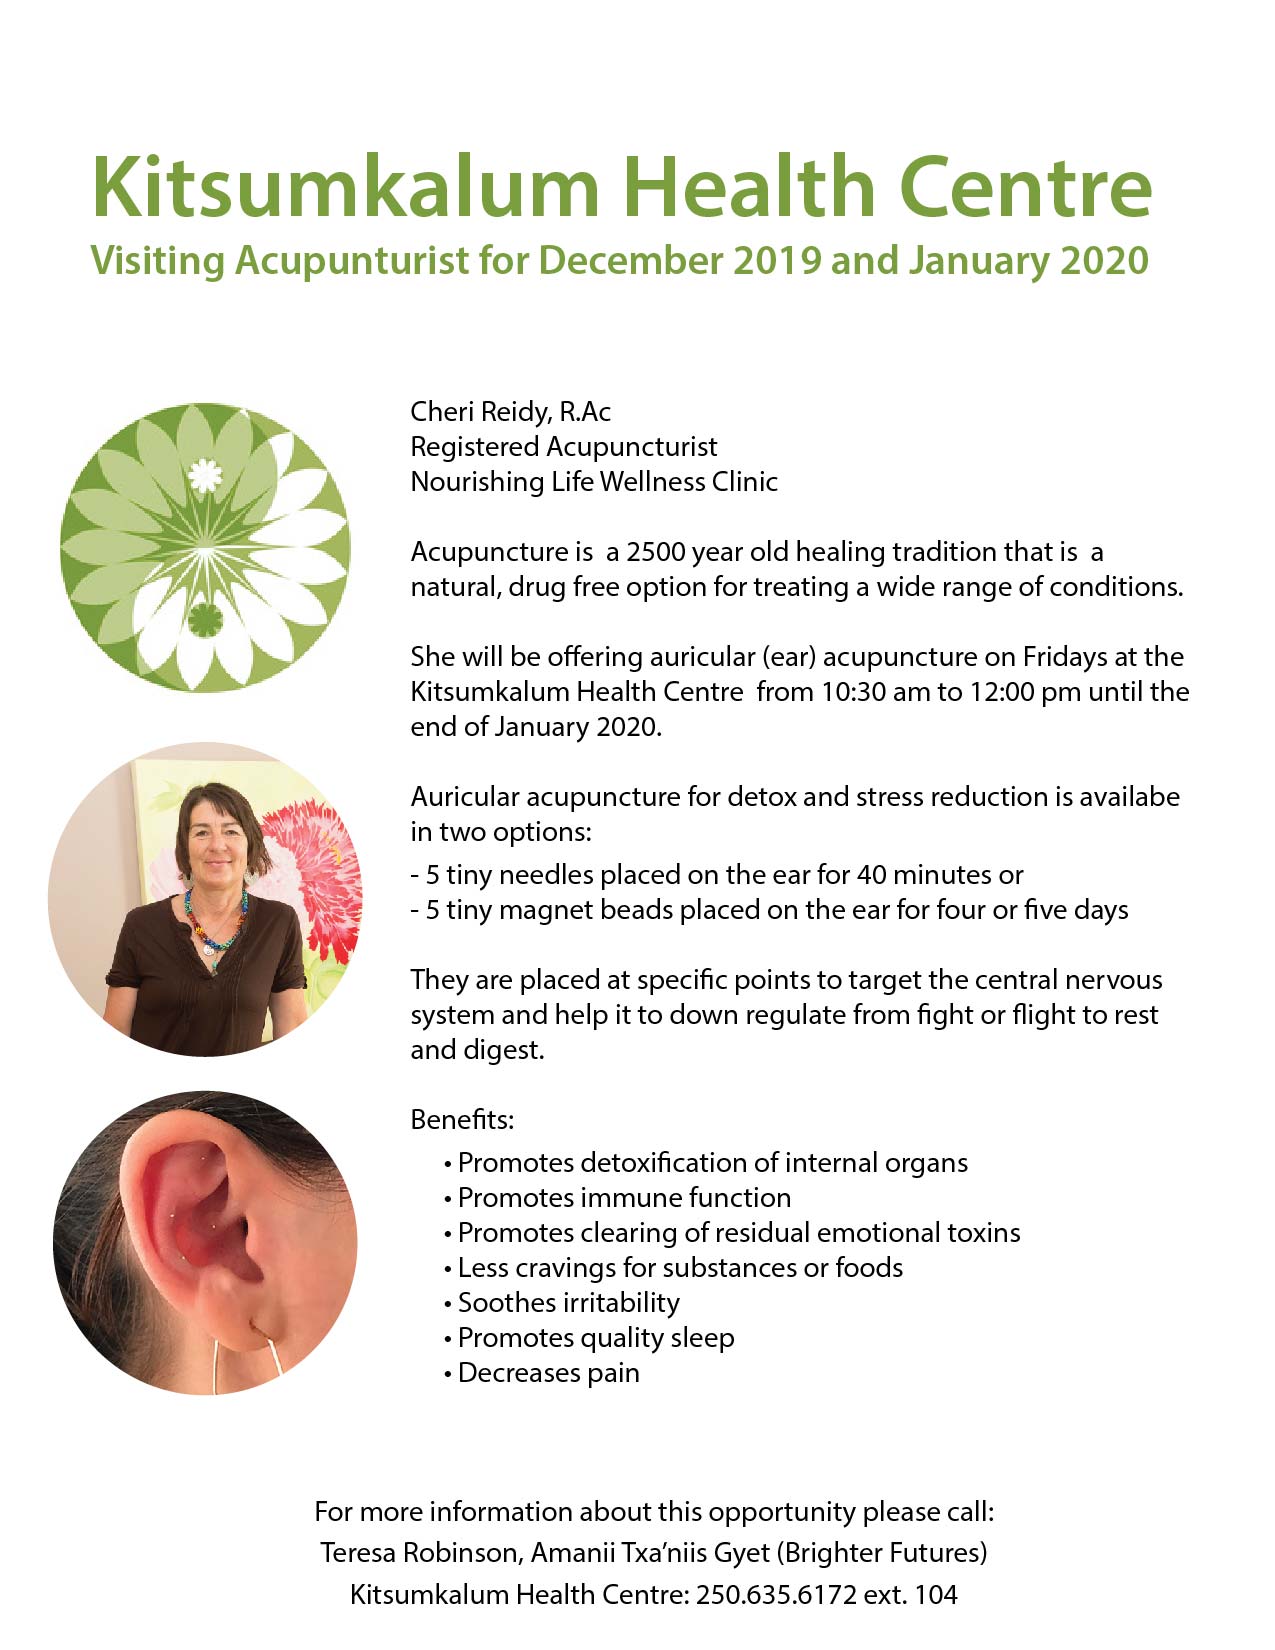 January 10th 2020 Cancelled – Visiting Acupuncturist at Kitsumkalum Health